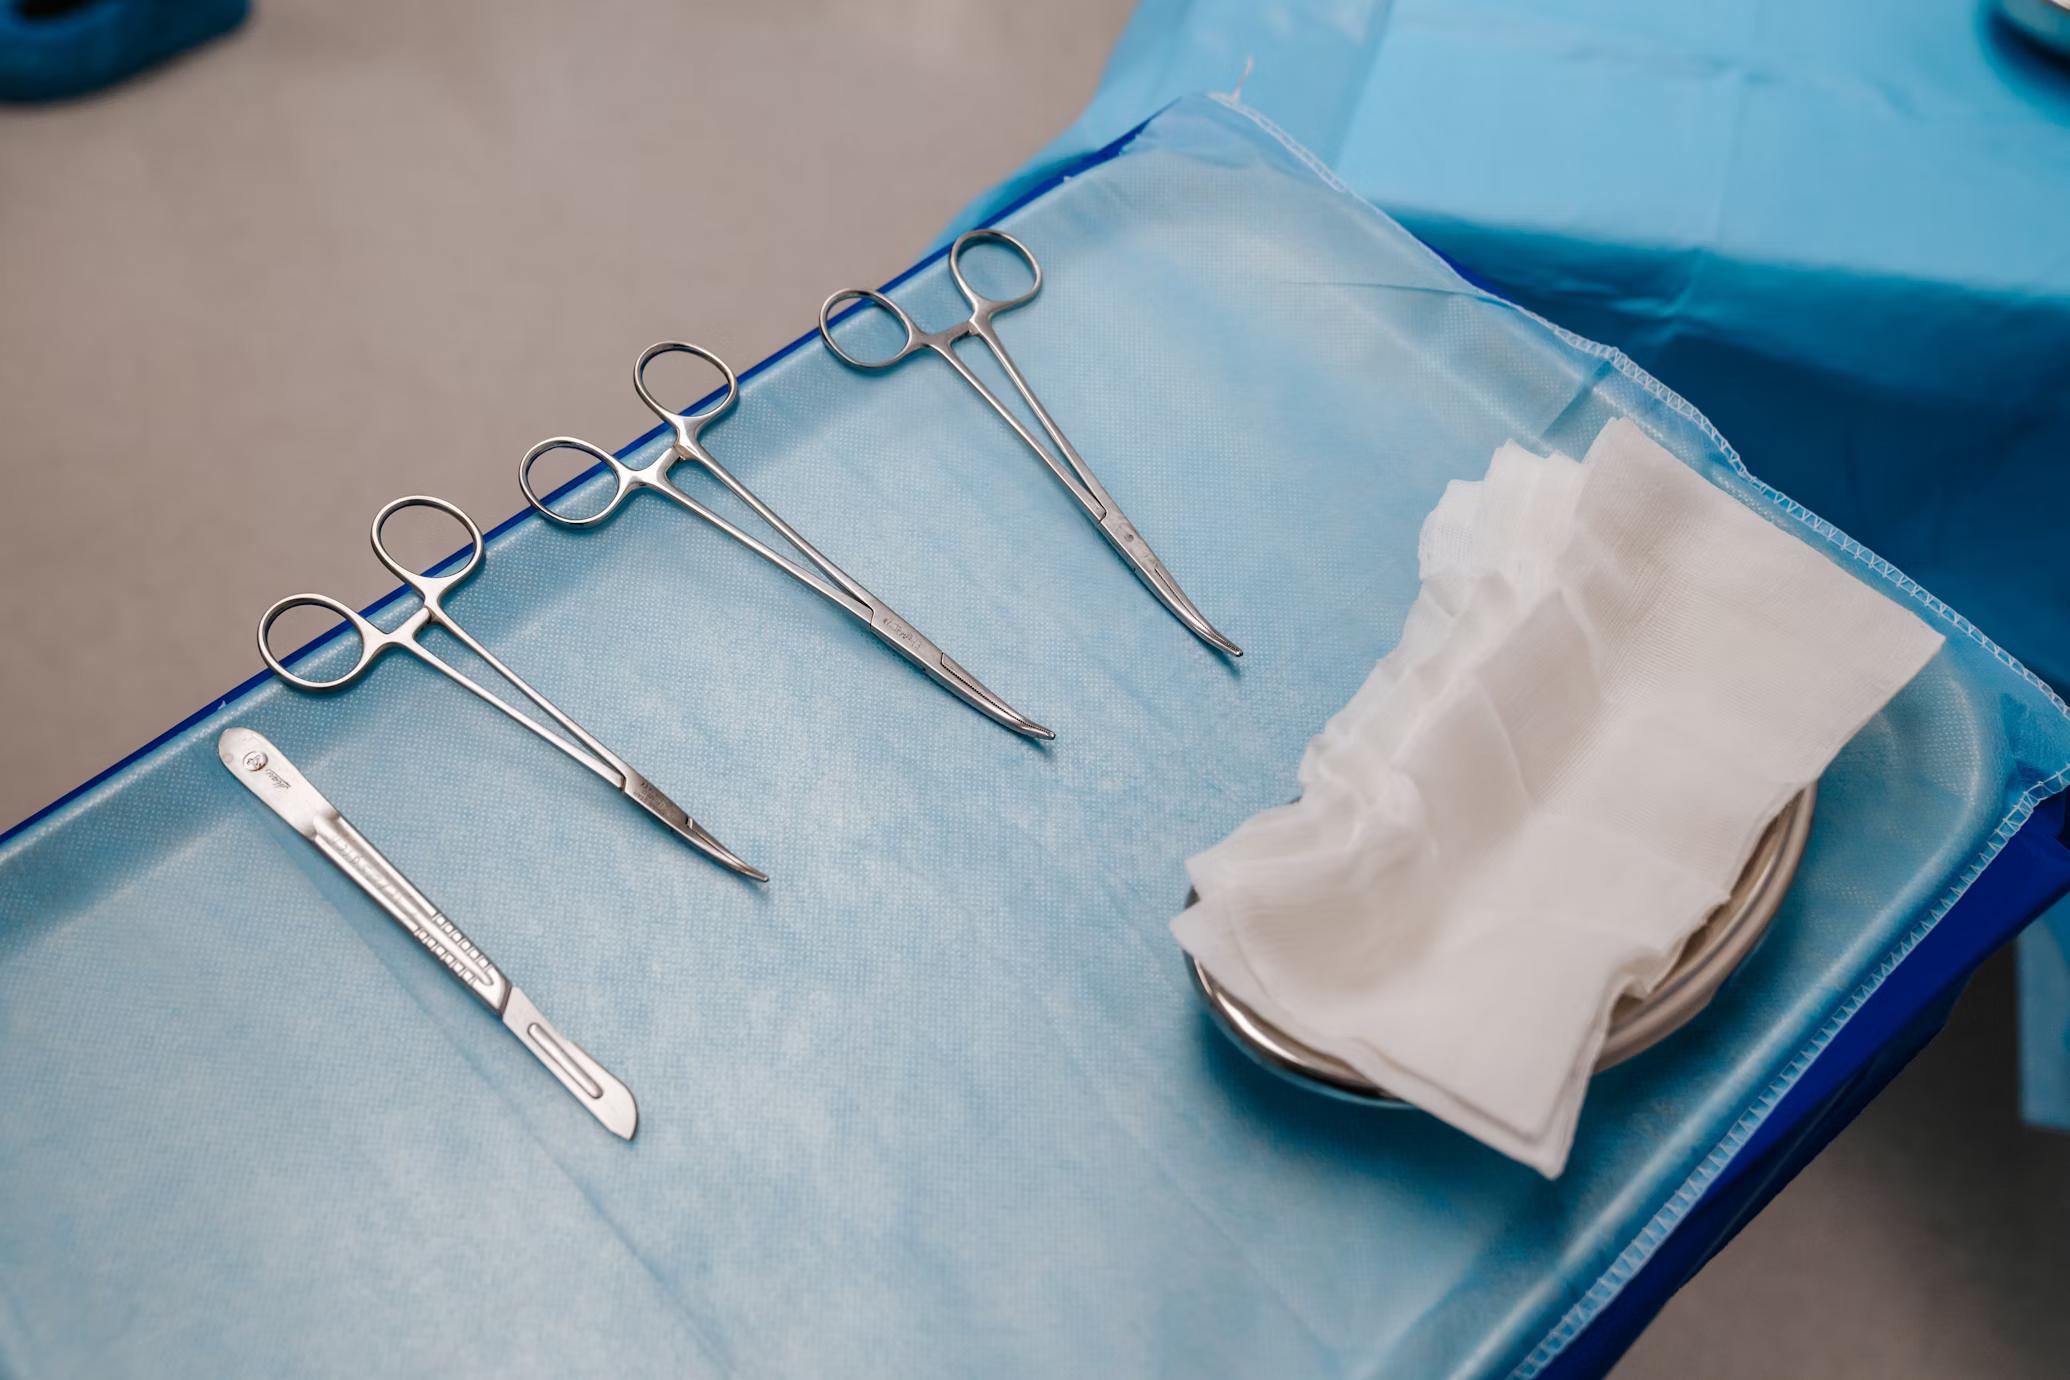 Surgical instruments 